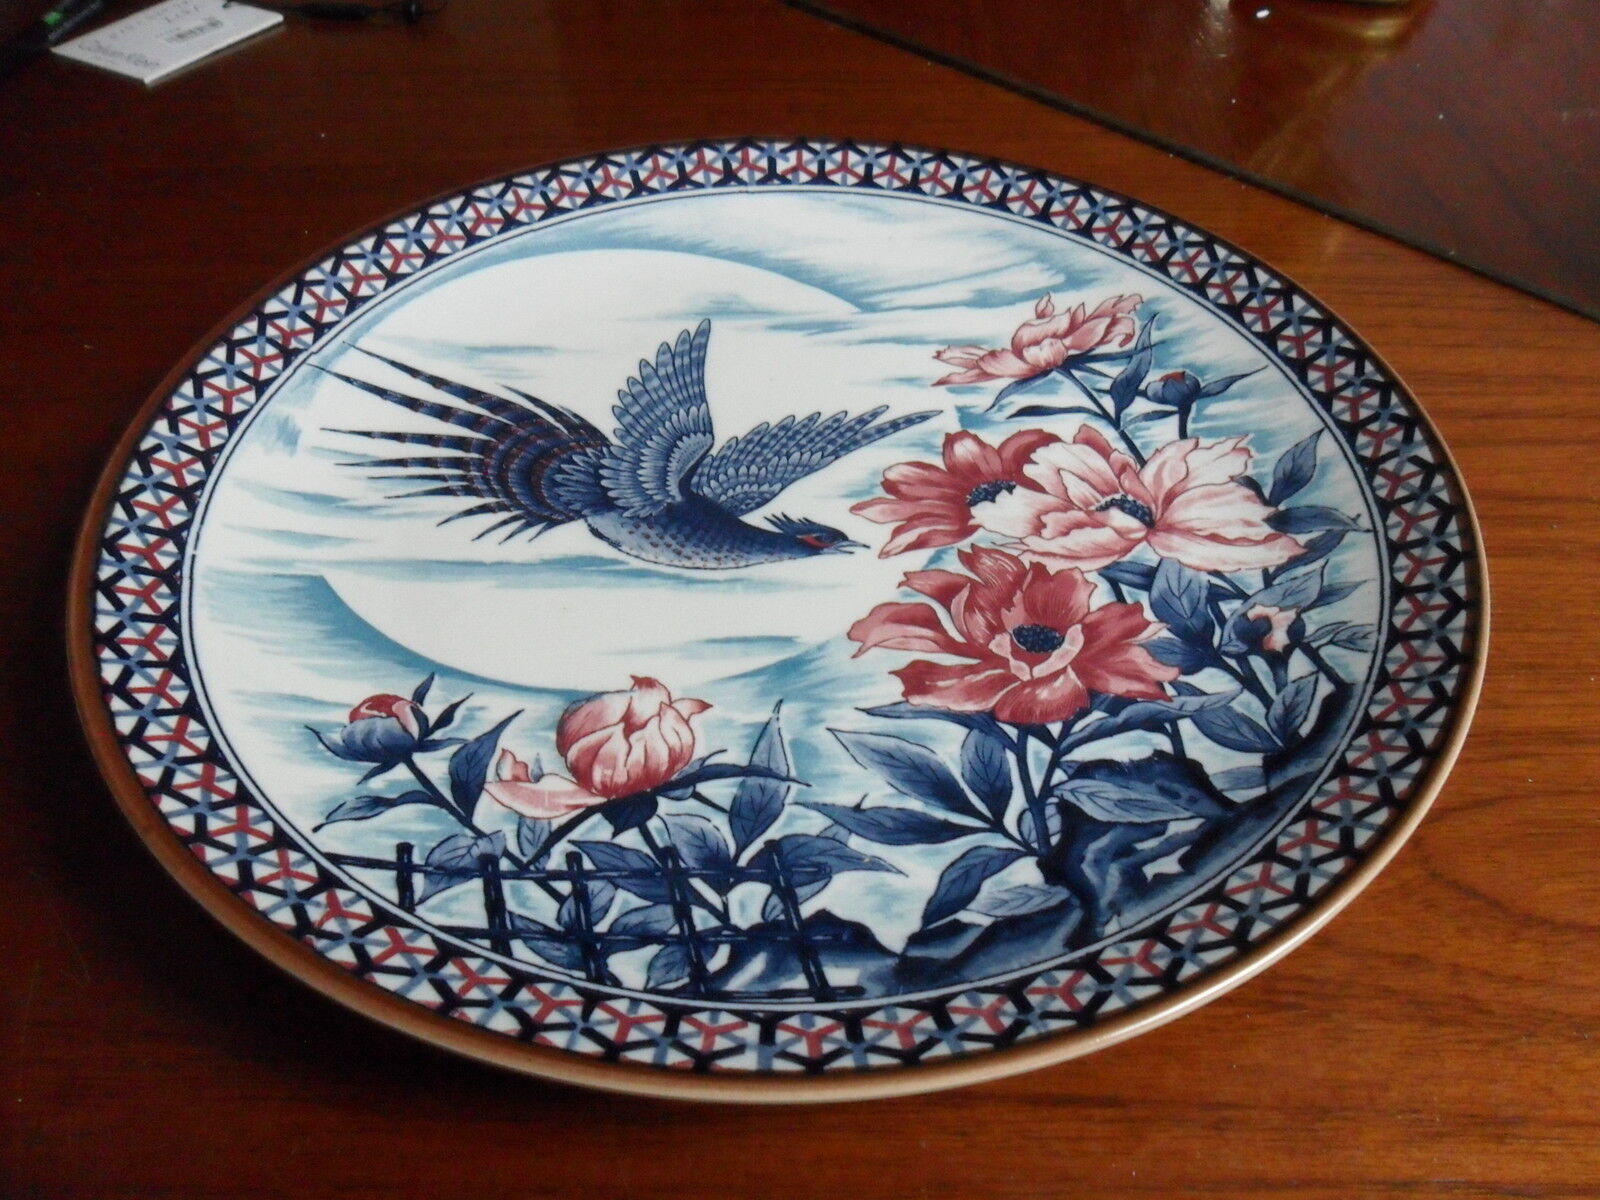 Primary image for ASAHI JAPAN multicolor platter 12 1/2" diam with a flying bird of paradise[am3]